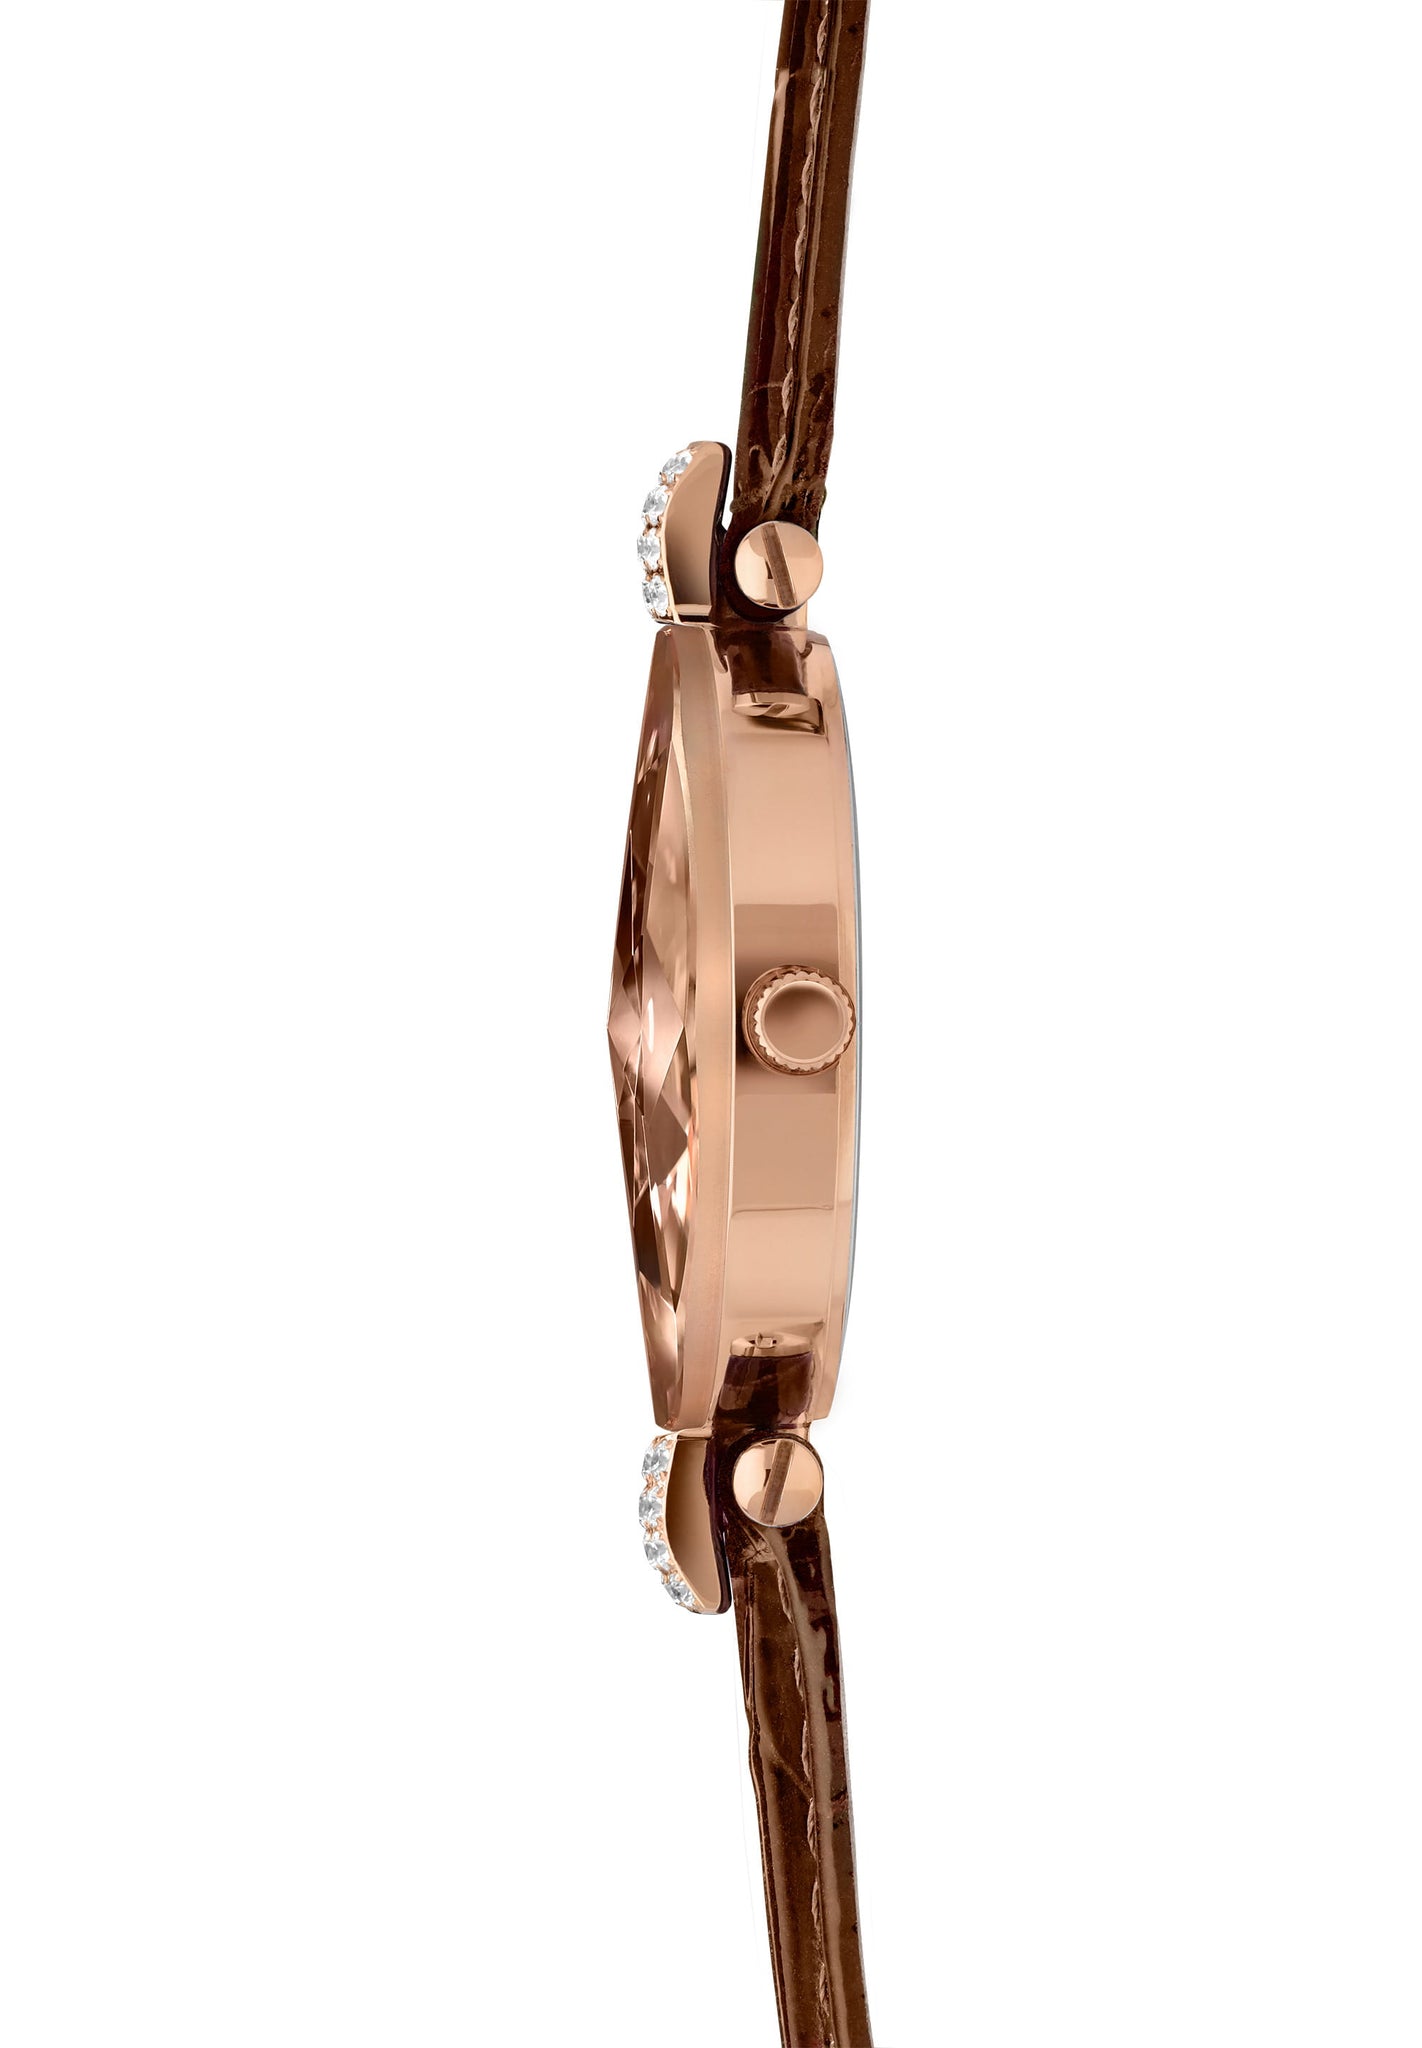 Facet Strass Reloj Mujer Suizo J5.625.M